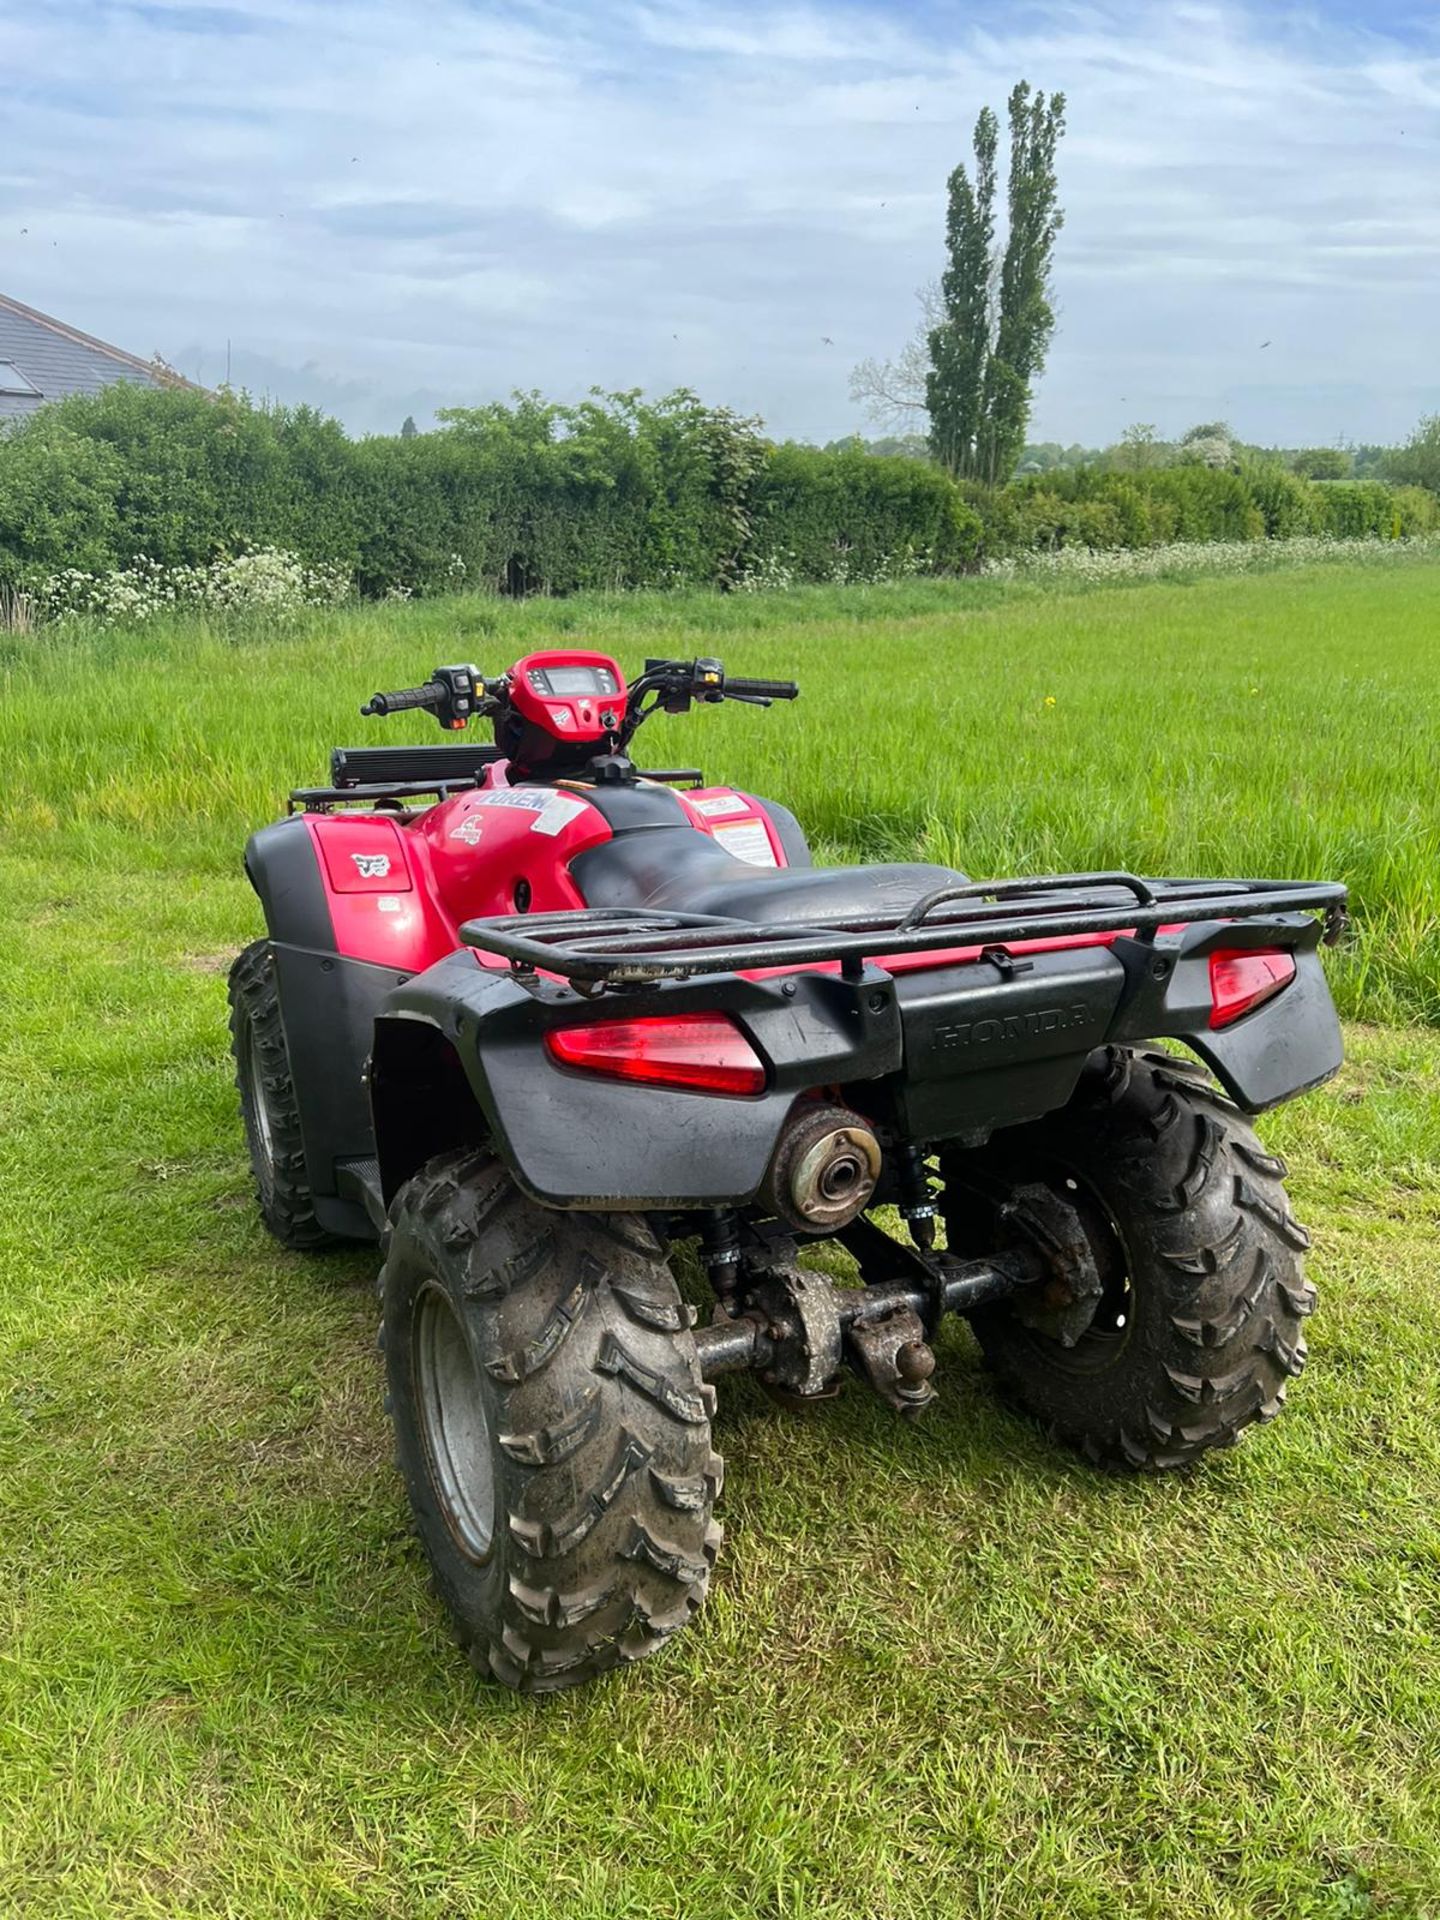 HONDA FORMAN 500 FARM QUAD, SELECTABLE 2 and 4 WHEEL DRIVE, IN GOOD CONDITION "PLUS VAT" - Image 4 of 12